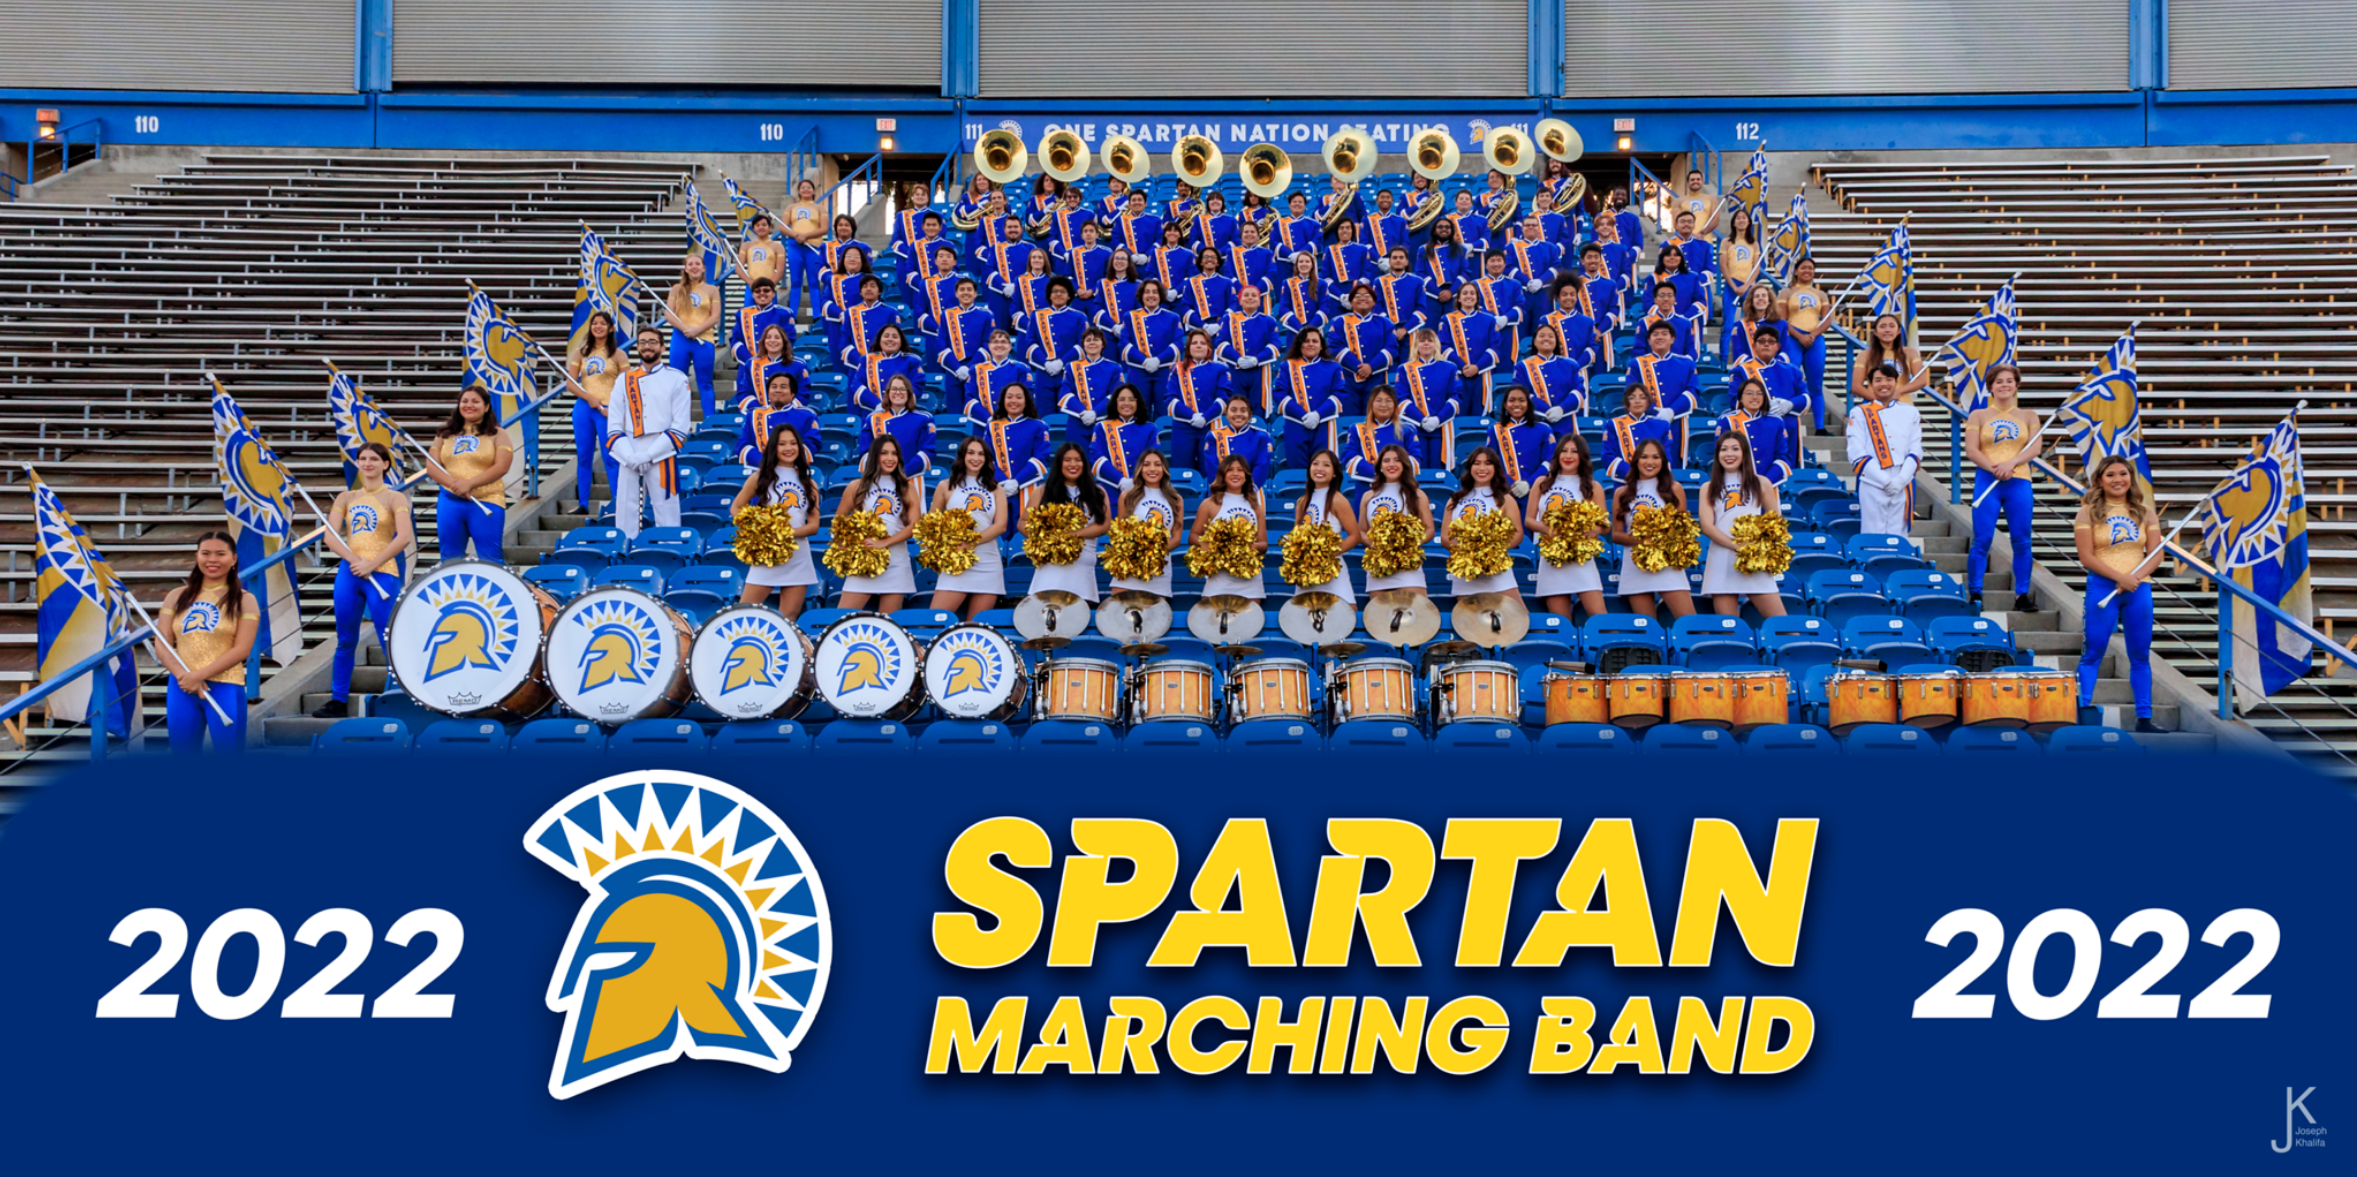 Group photo of the 2022 Spartan Marching Band